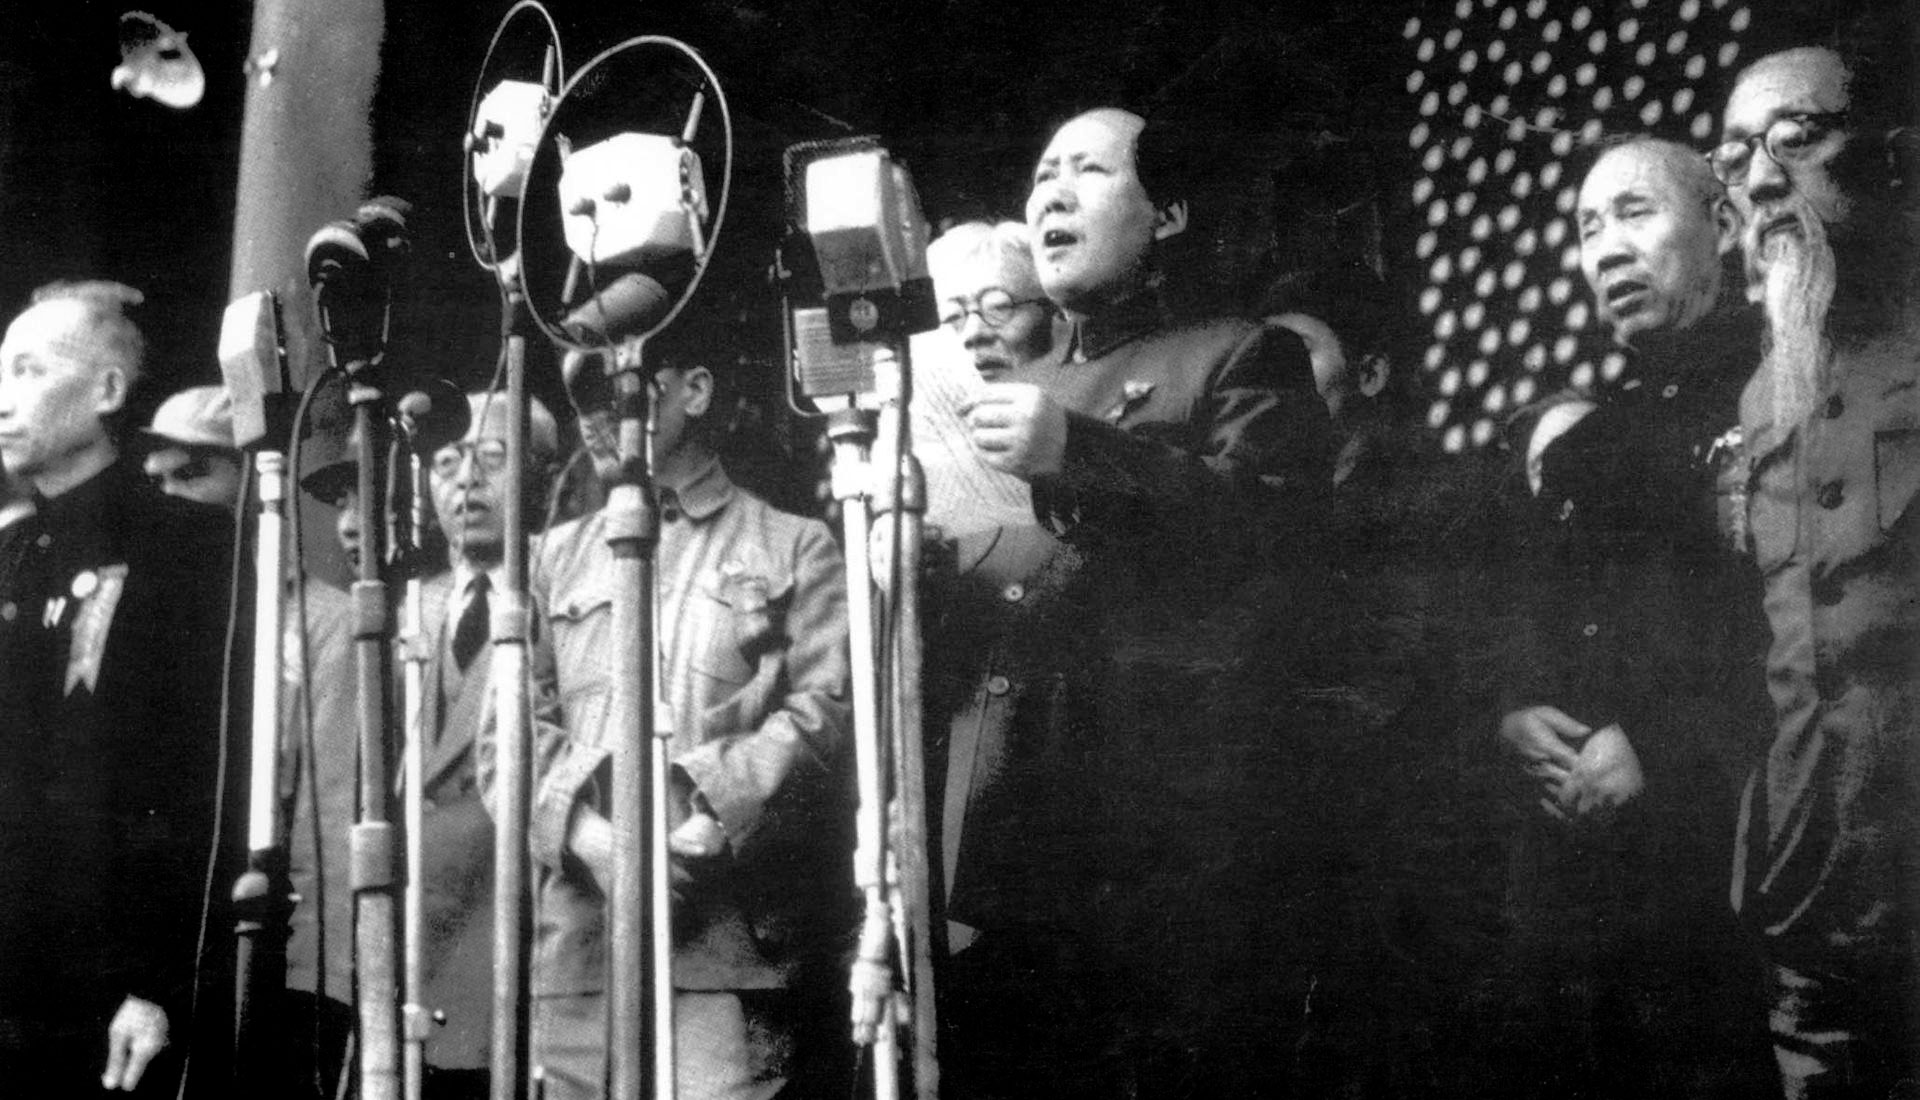 Peoples Republic of China's president Liu Shaoqi was the primary target of the Chinese cultural revolution. Photo: Unknown.